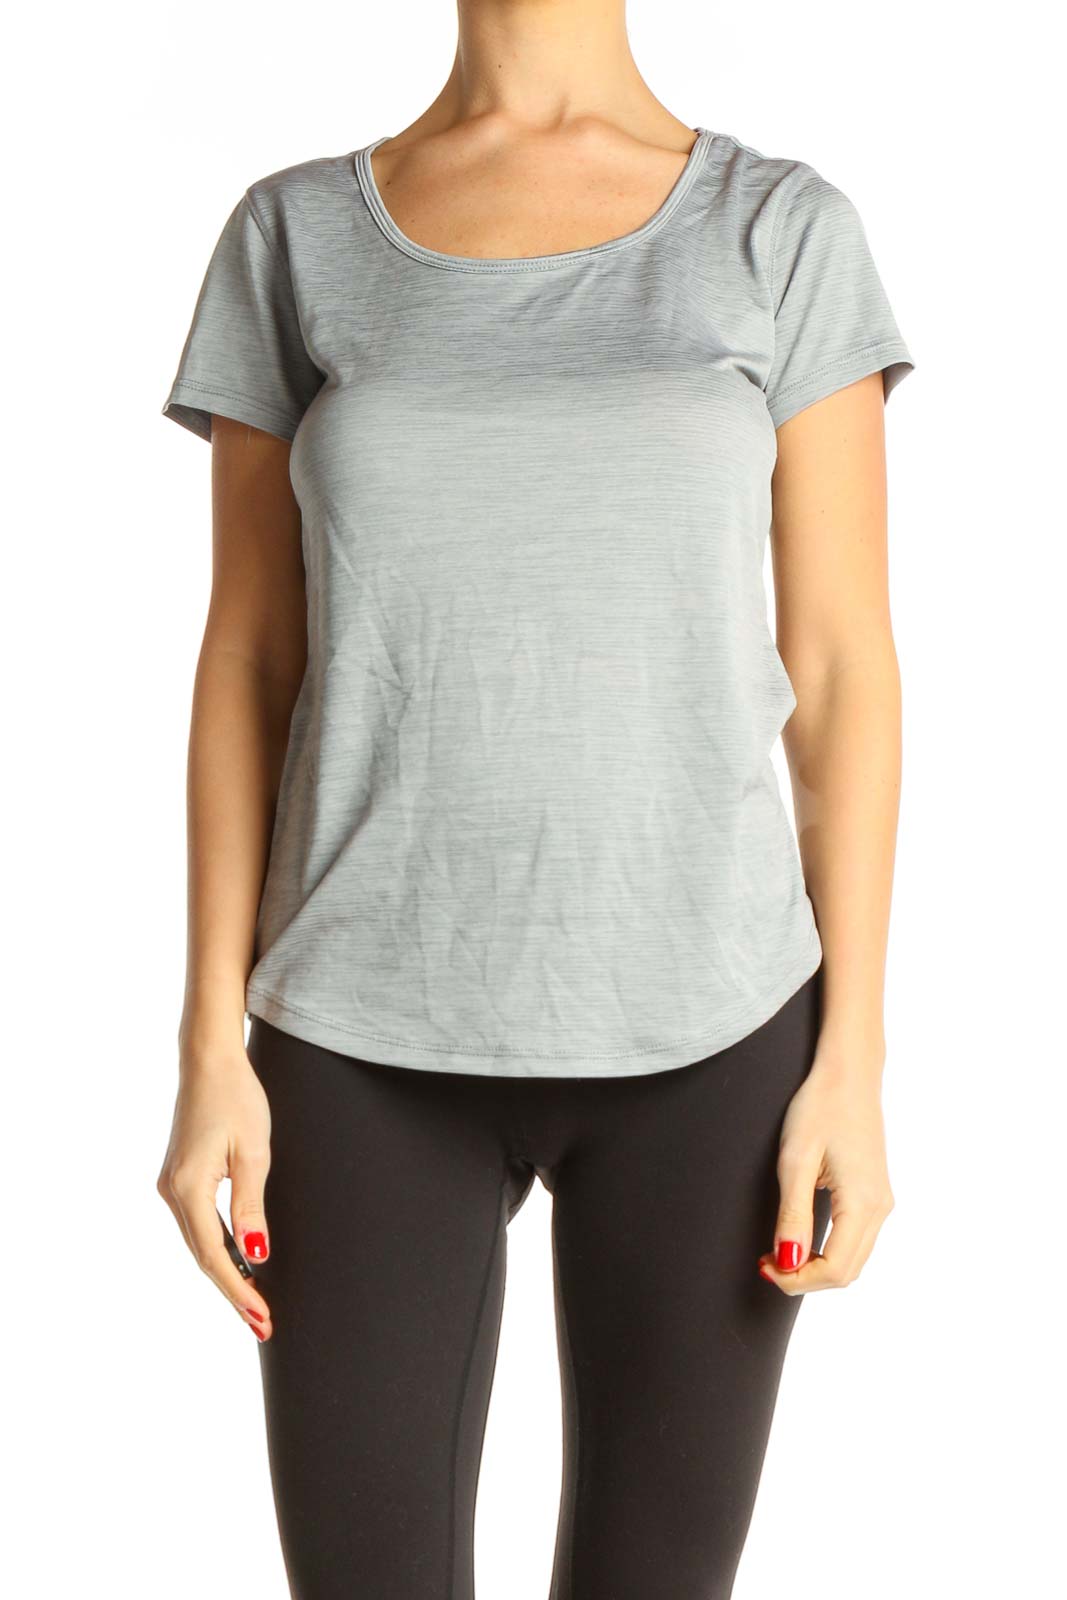 Gray Solid Activewear T-Shirt Front